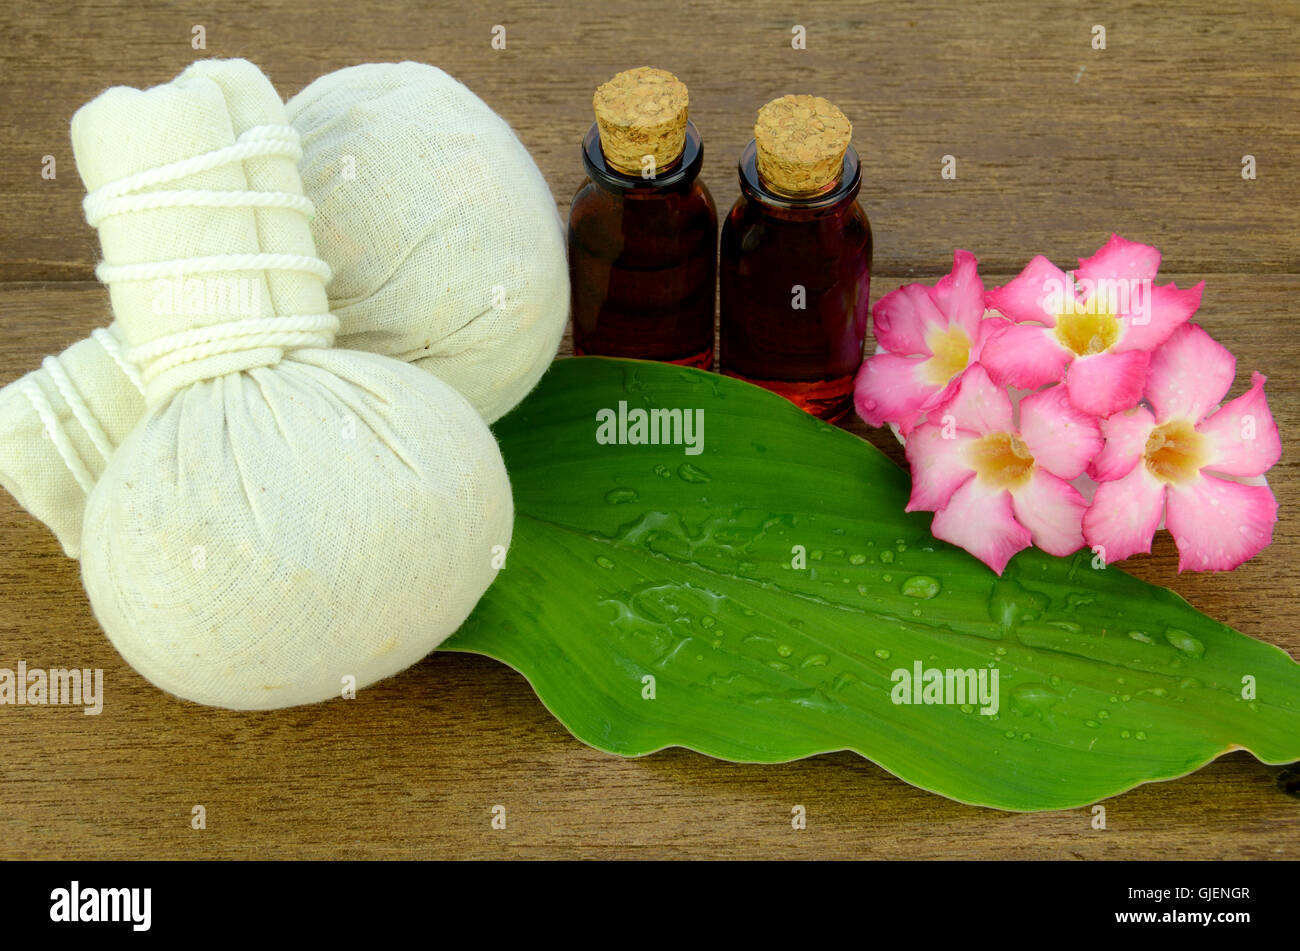 Thai style spa with herbal compress ball and aroma oil for relax muscle and skin treatment. Stock Photo